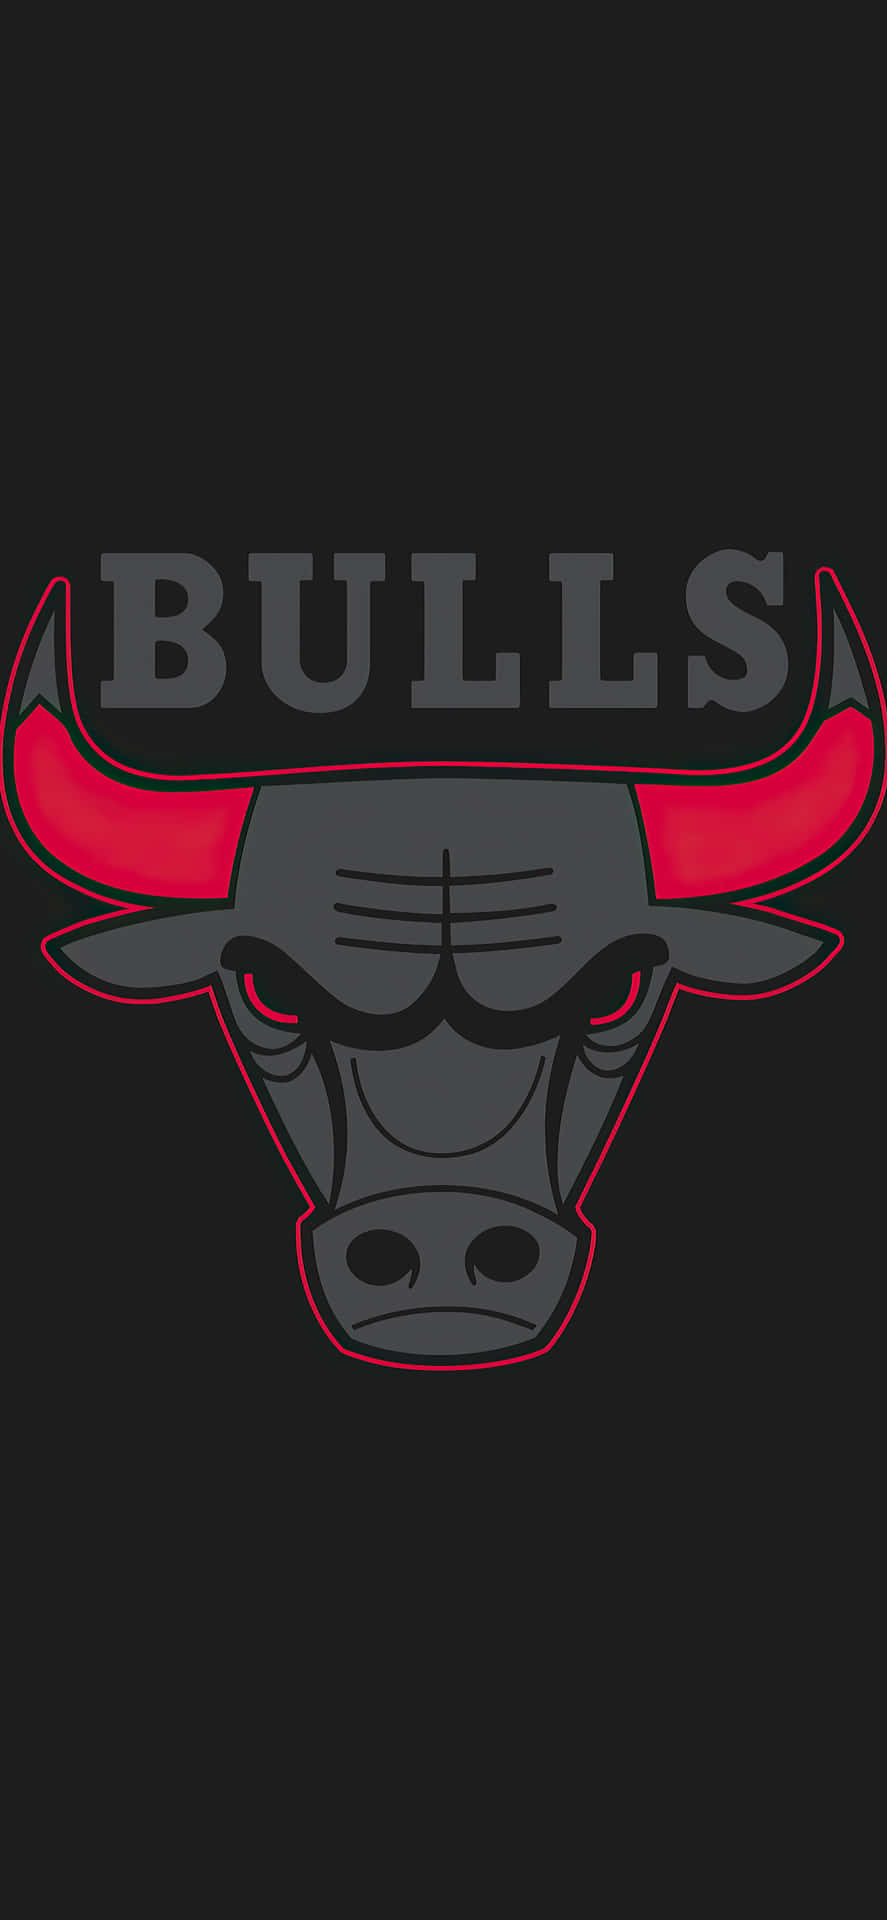 Show your Chicago Bulls pride and back your favorite team with this awesome IPhone background! Wallpaper